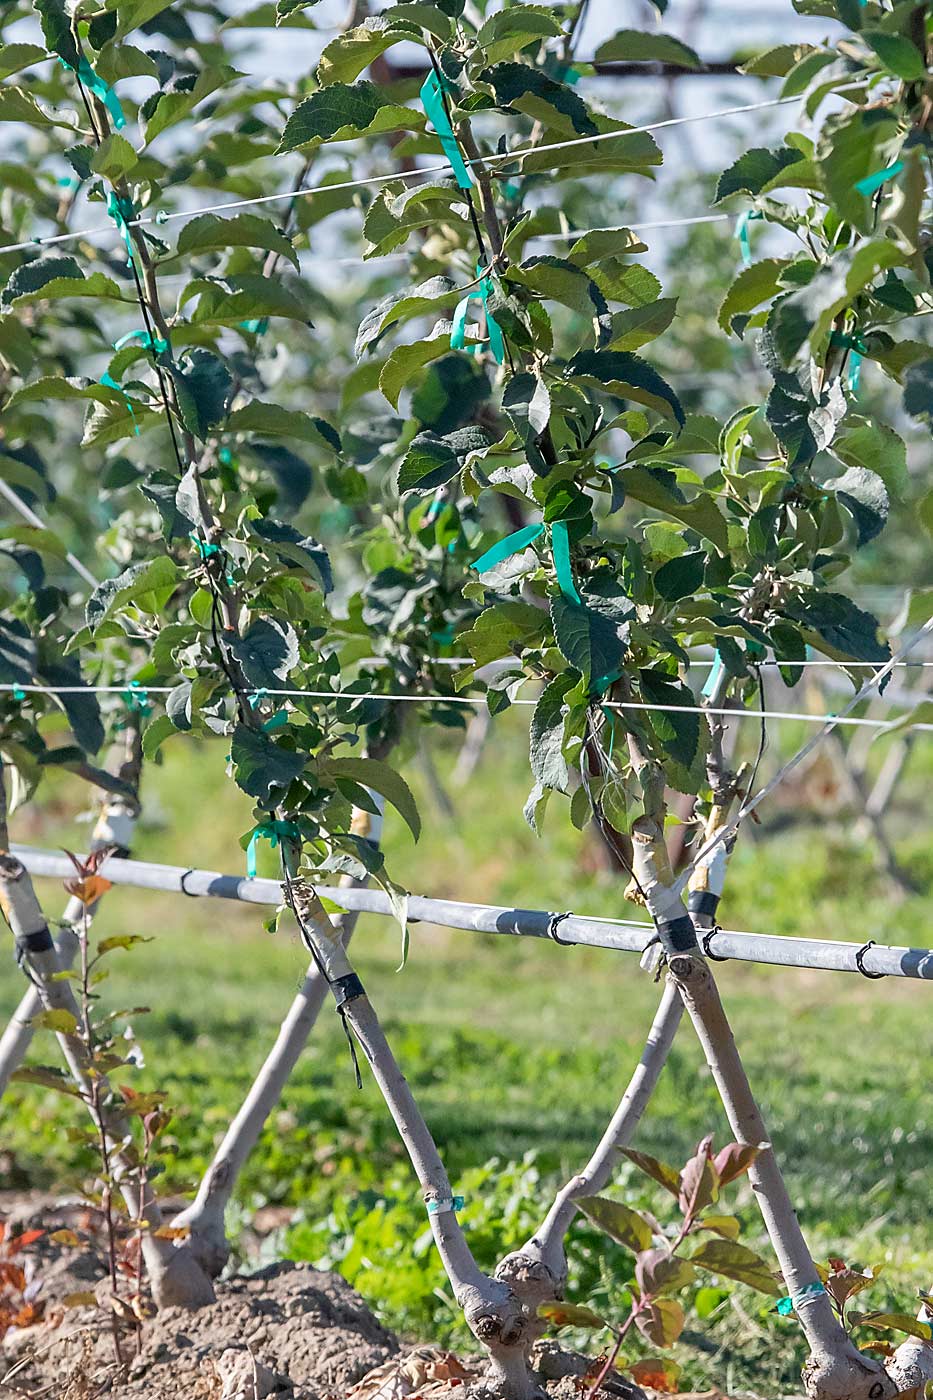 “It’s a sign of the times,” John Douglas said of this young apple block, grafted over from Premier Honeycrisp — which struggled to color in the warm growing region — to Envy and high-color Galas. “We have to adapt quickly.” (TJ Mullinax/Good Fruit Grower)